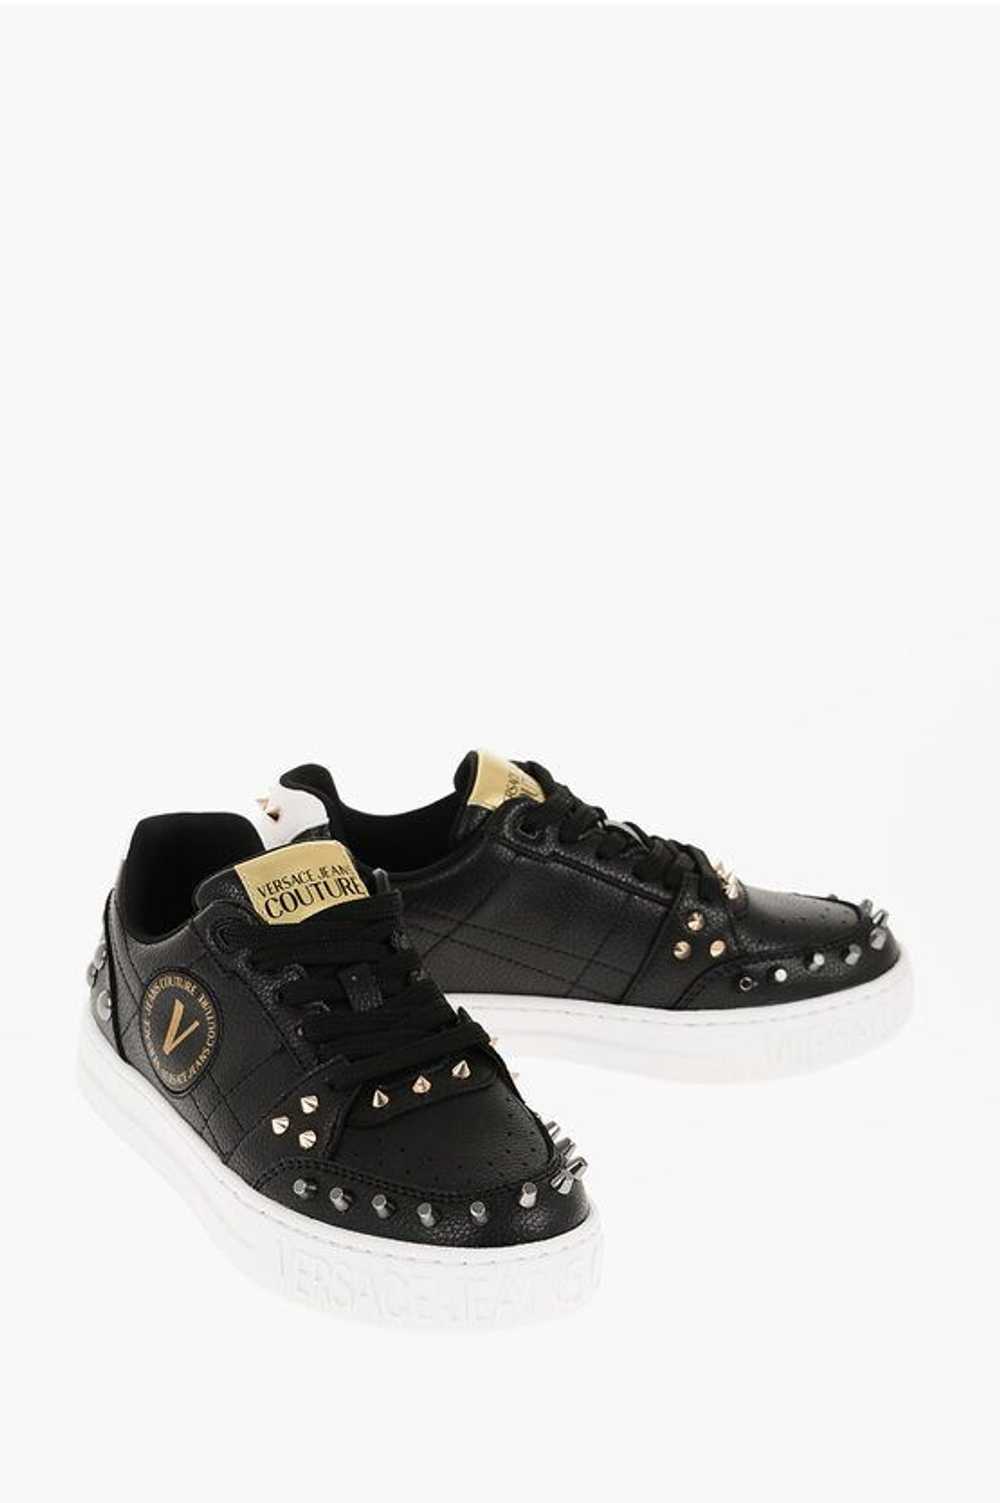 Versace og1mm0524 Leather Court Sneakers in Black - image 2